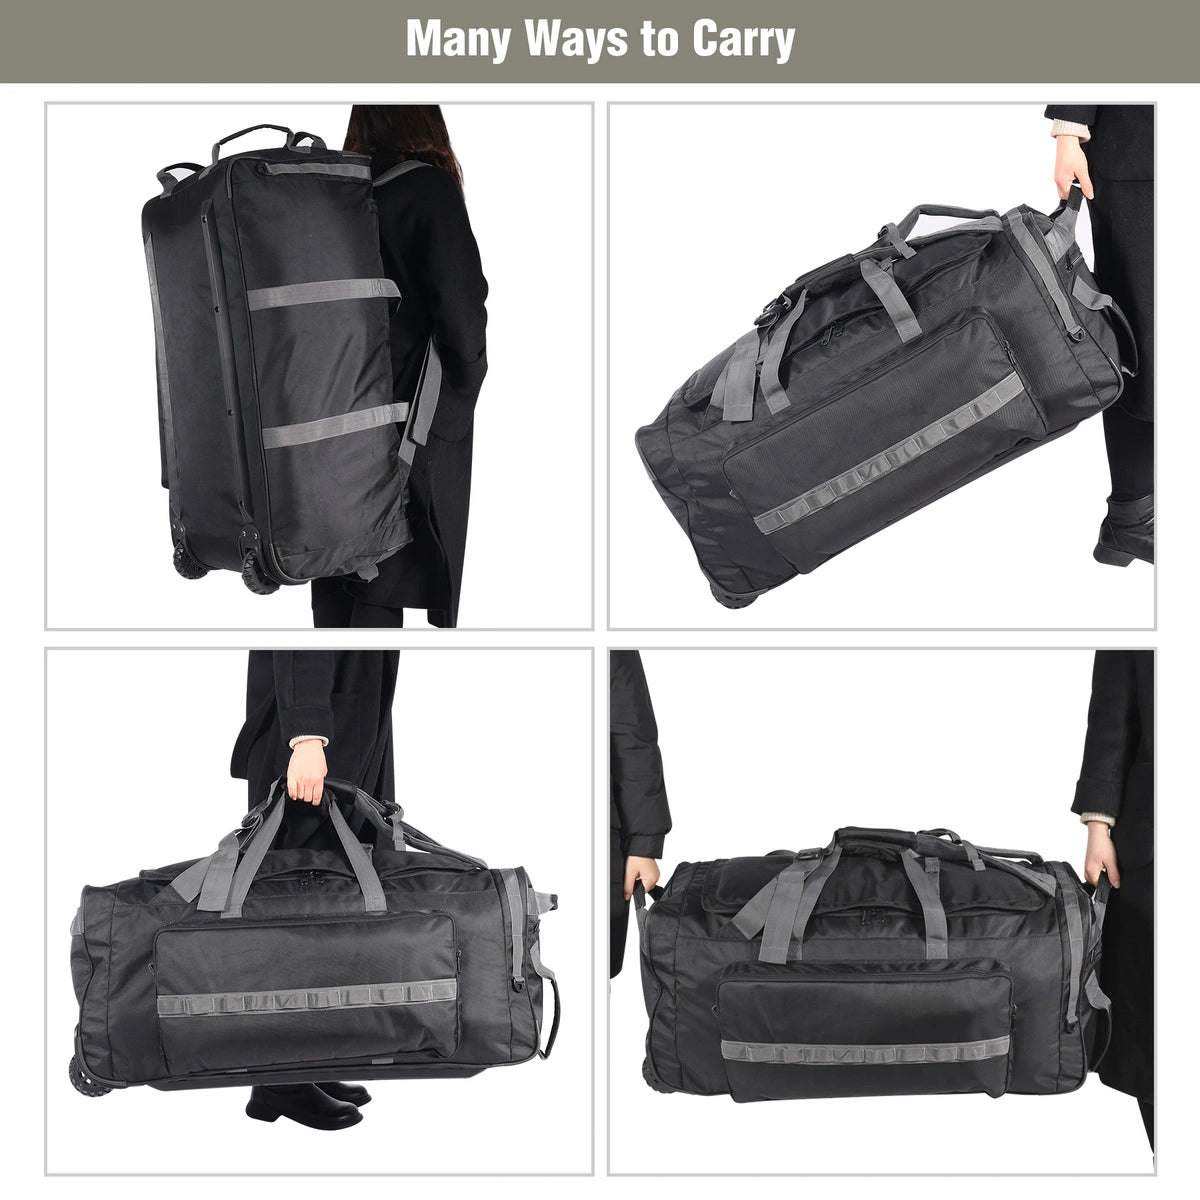 140L Tactical Duffle Bag with Wheels and Backpack Straps